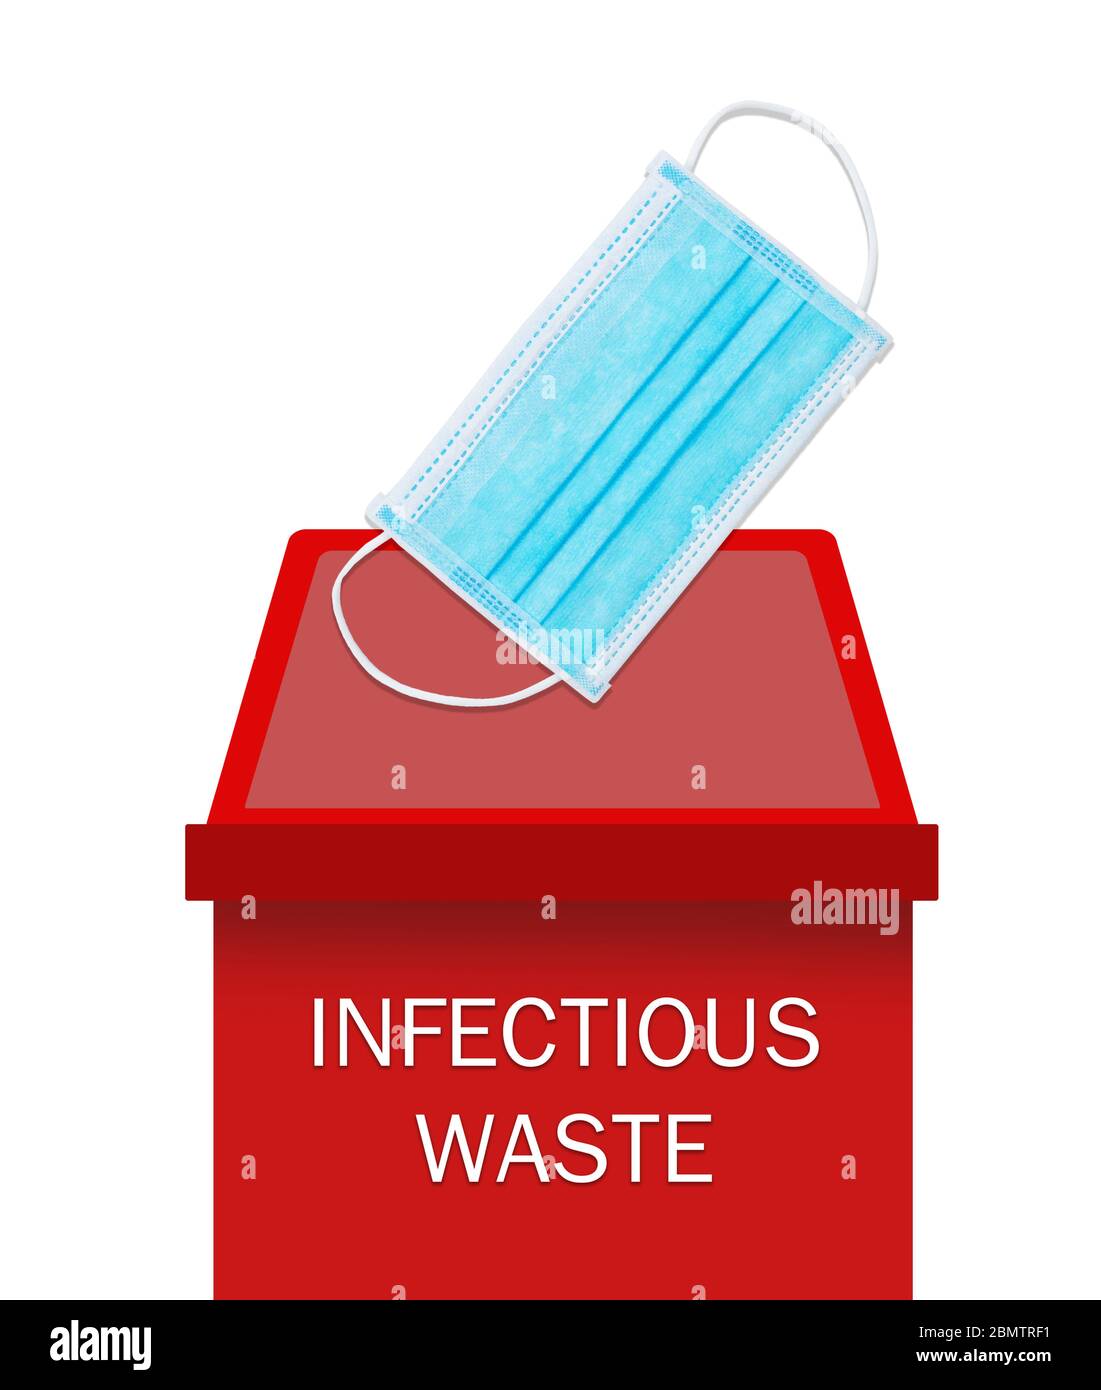 https://c8.alamy.com/comp/2BMTRF1/surgical-mask-into-infectious-waste-bin-infection-control-concept-2BMTRF1.jpg